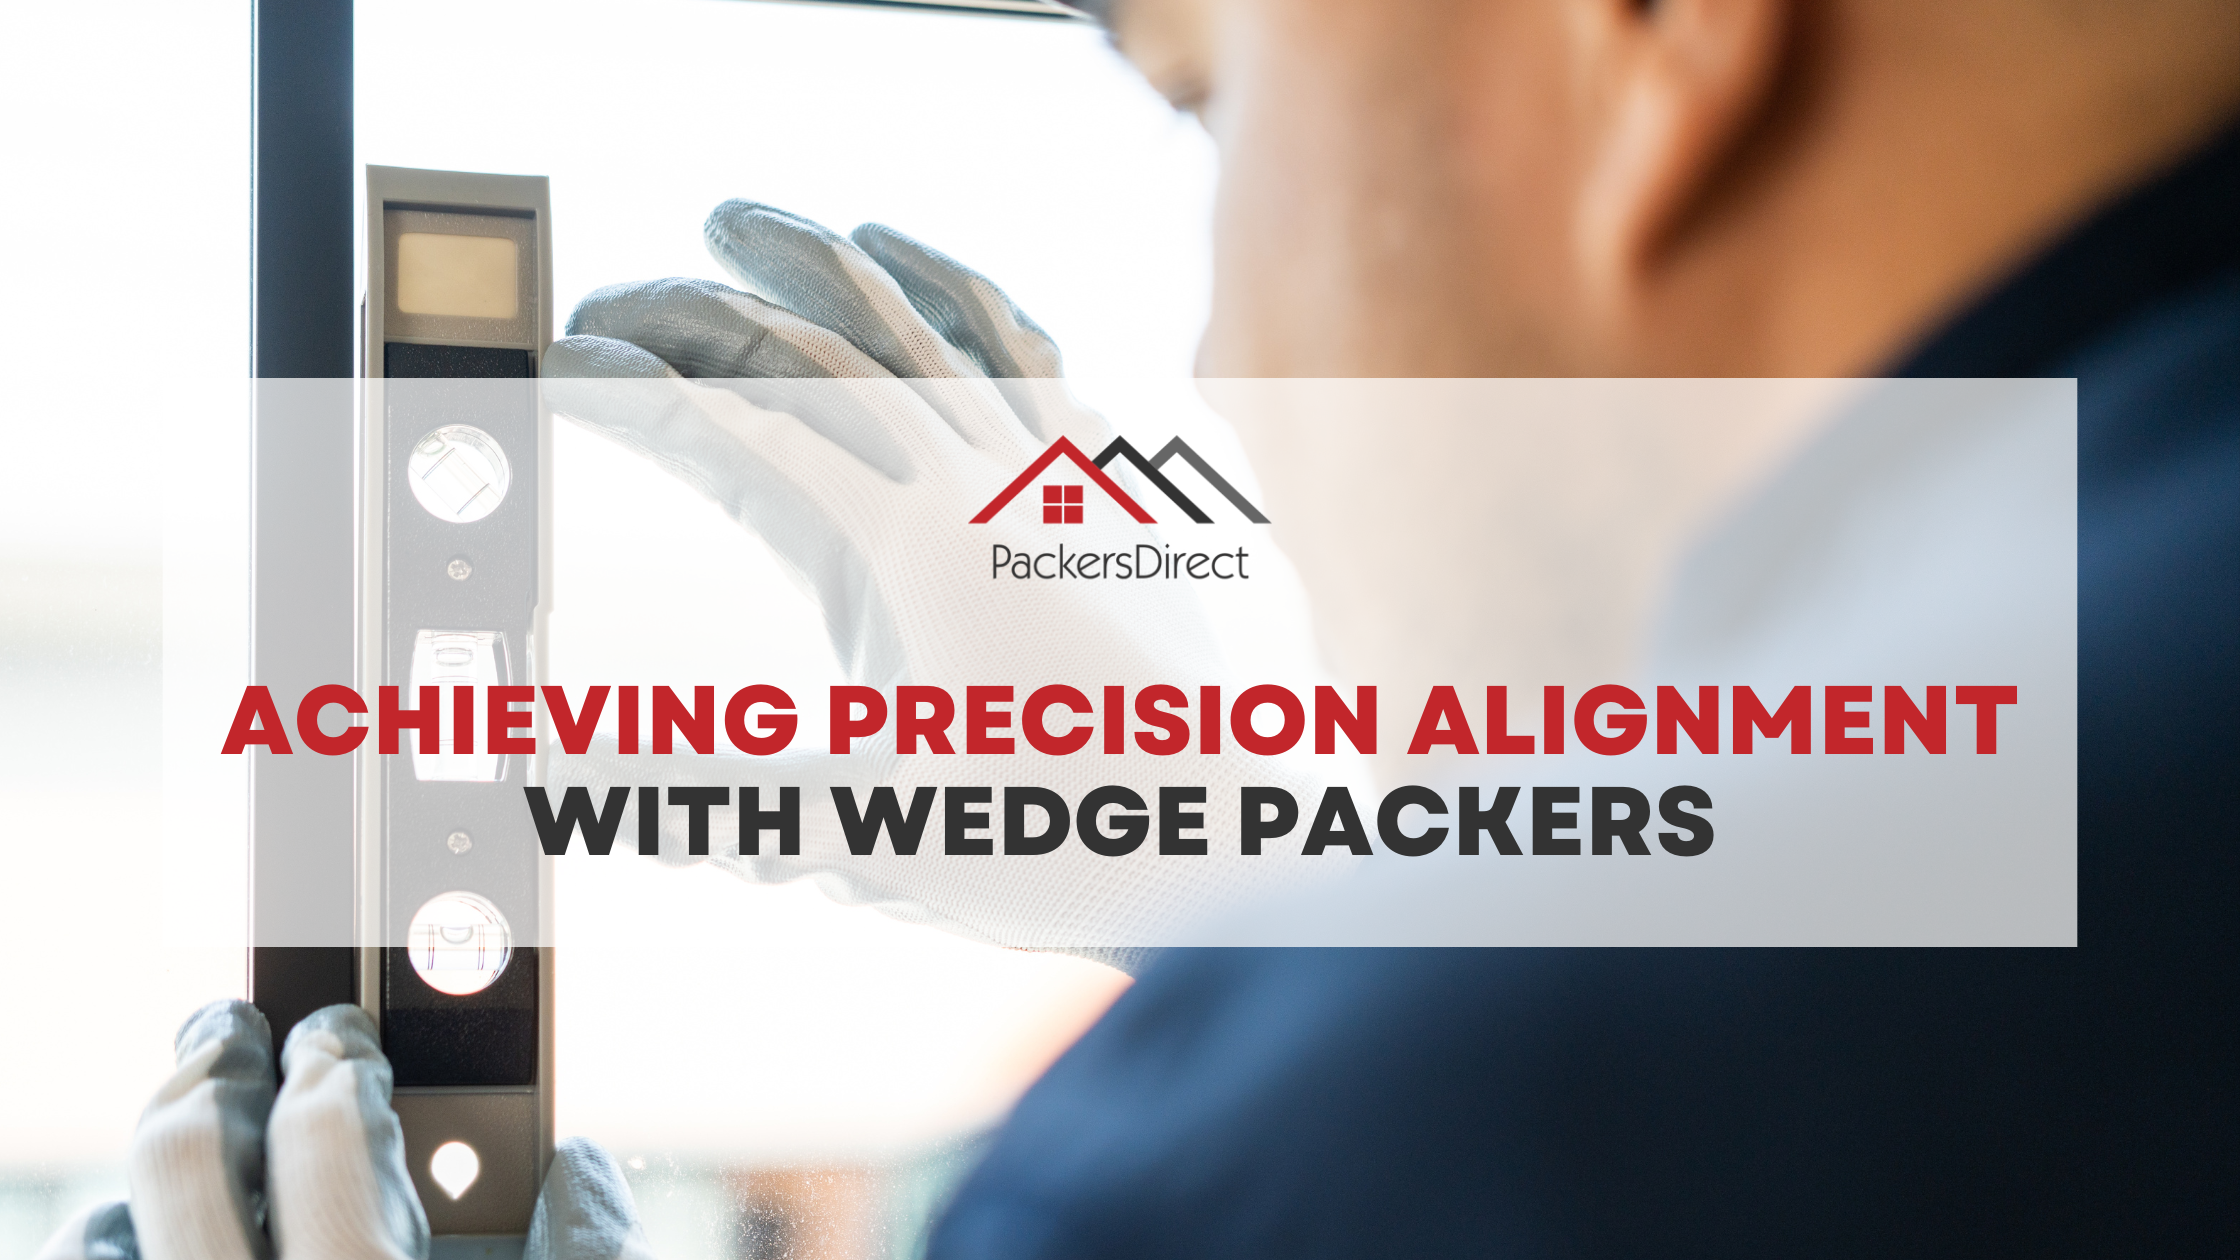 Achieving Precision Alignment with Wedge Packers